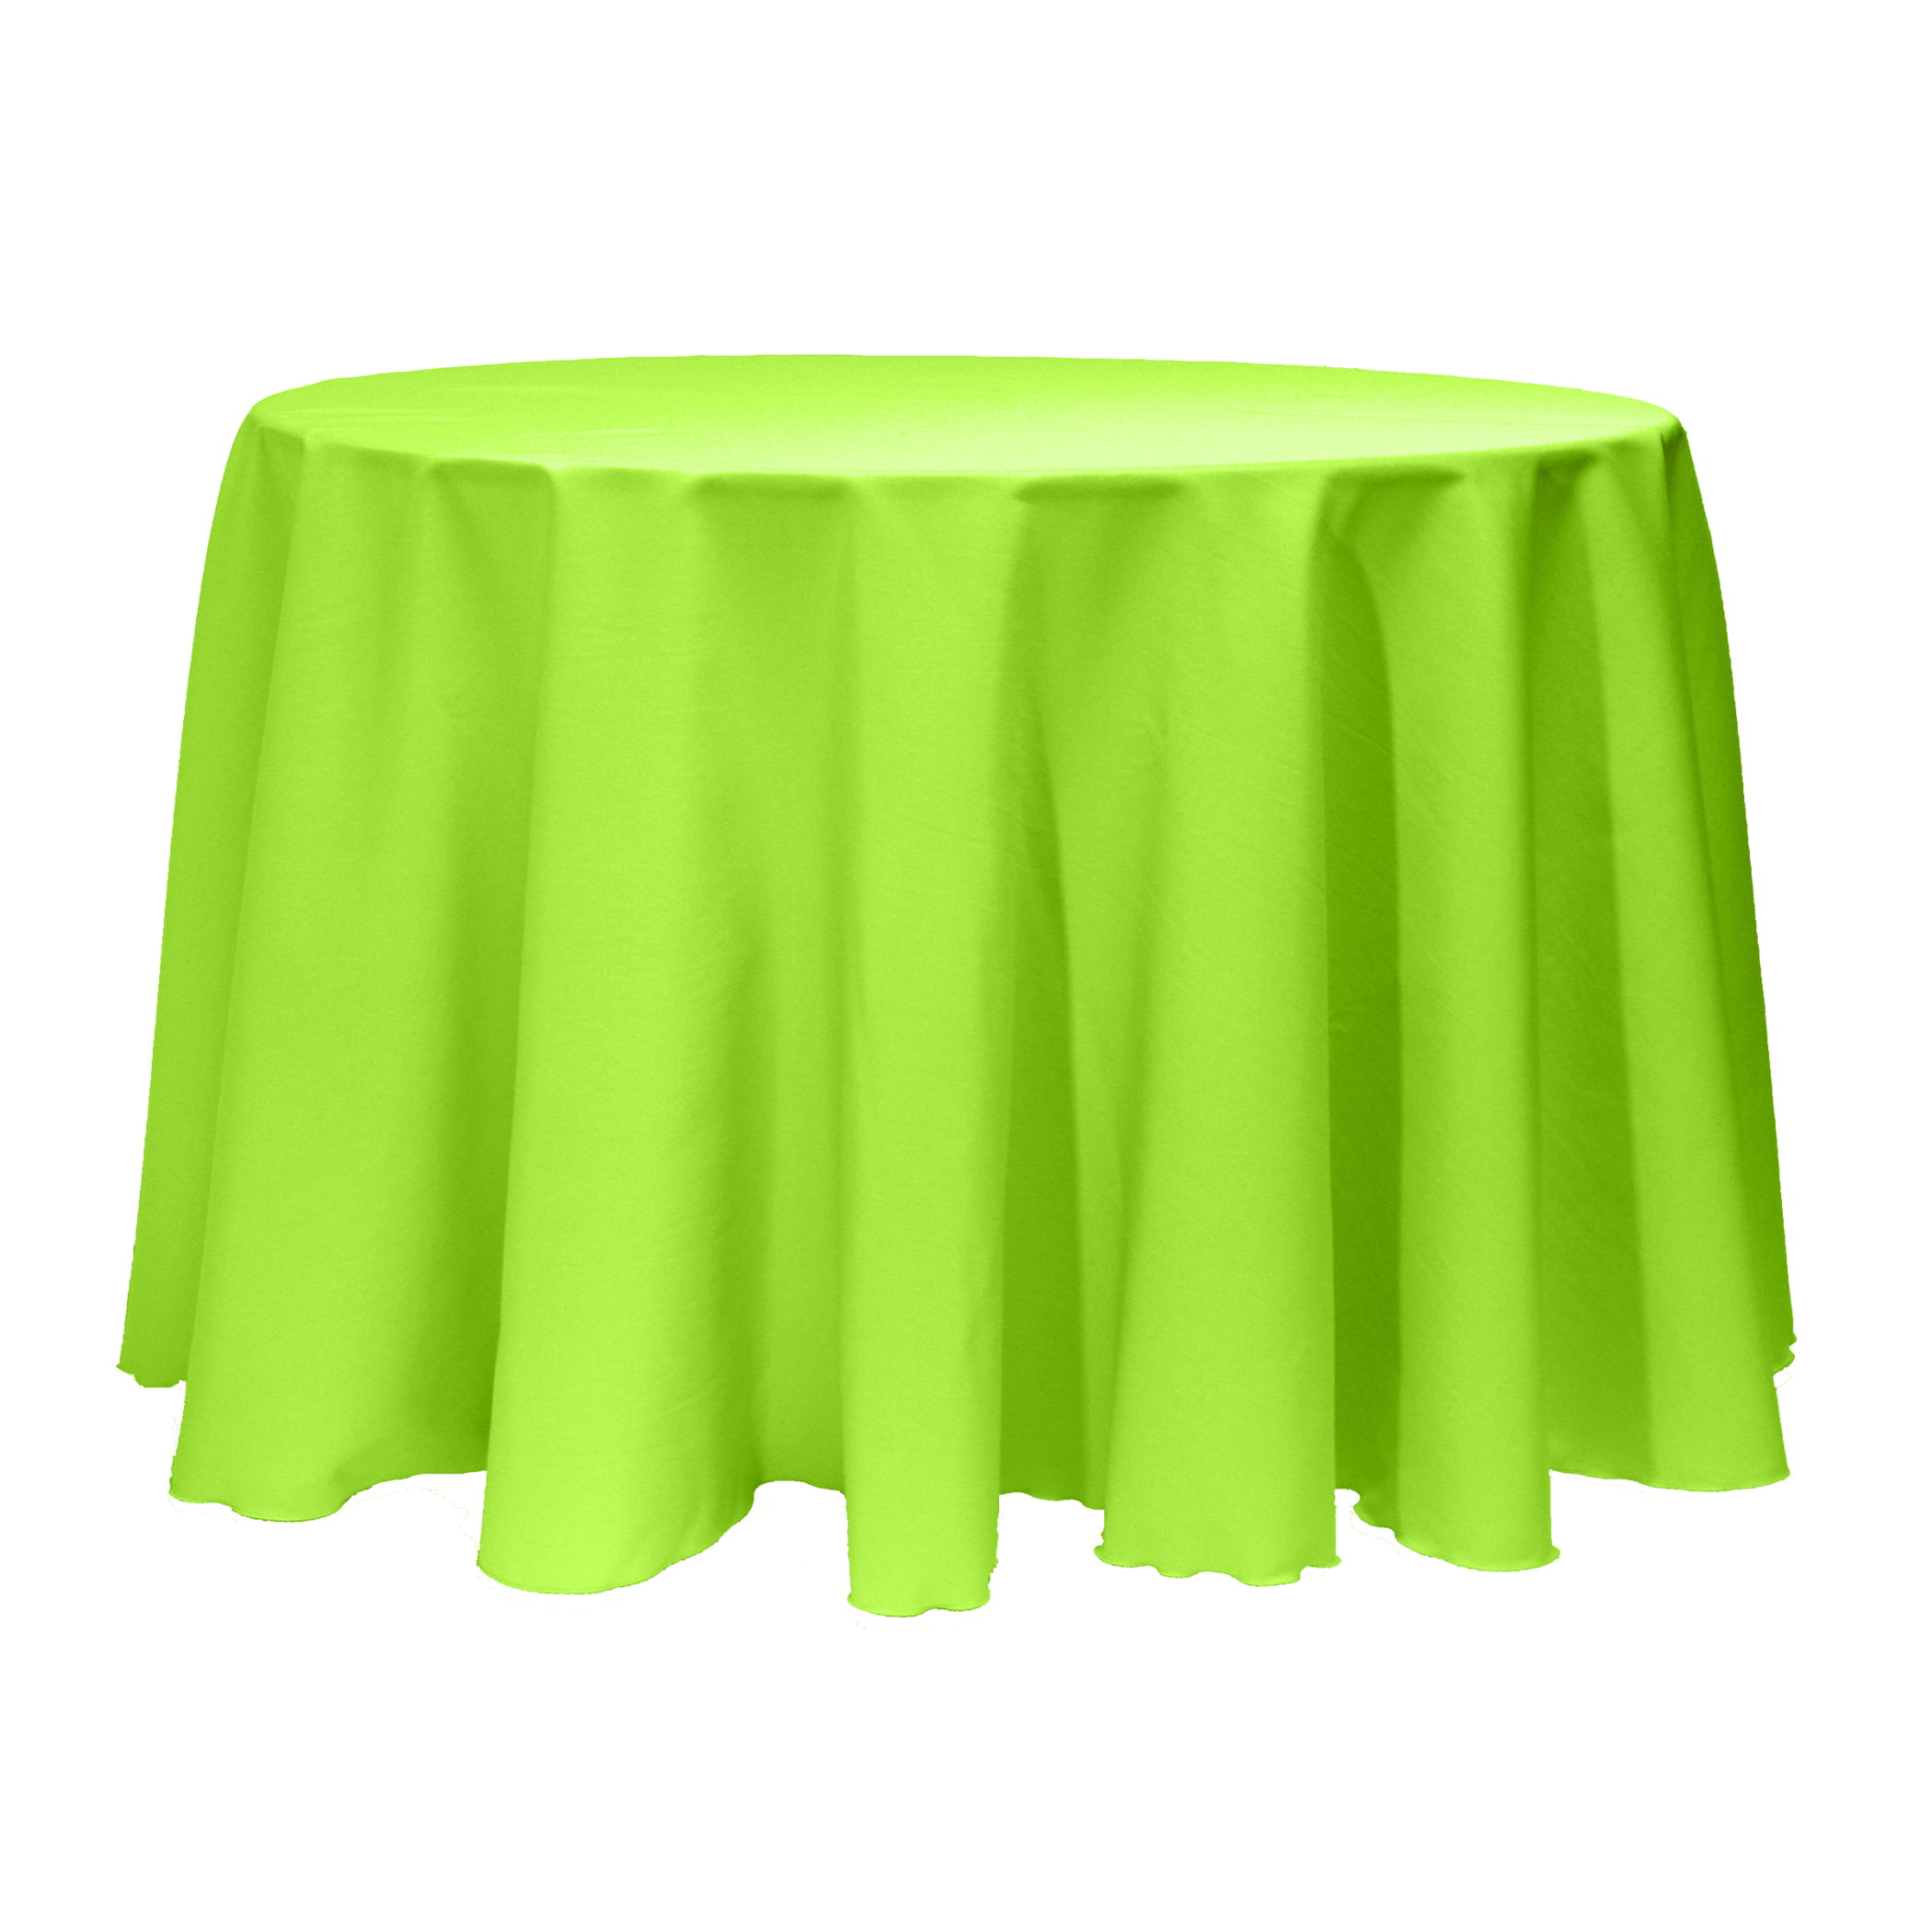 Poly Round Seamless Tablecloth Wedding Party Banquet Restaurant 5 Pk 132 in 